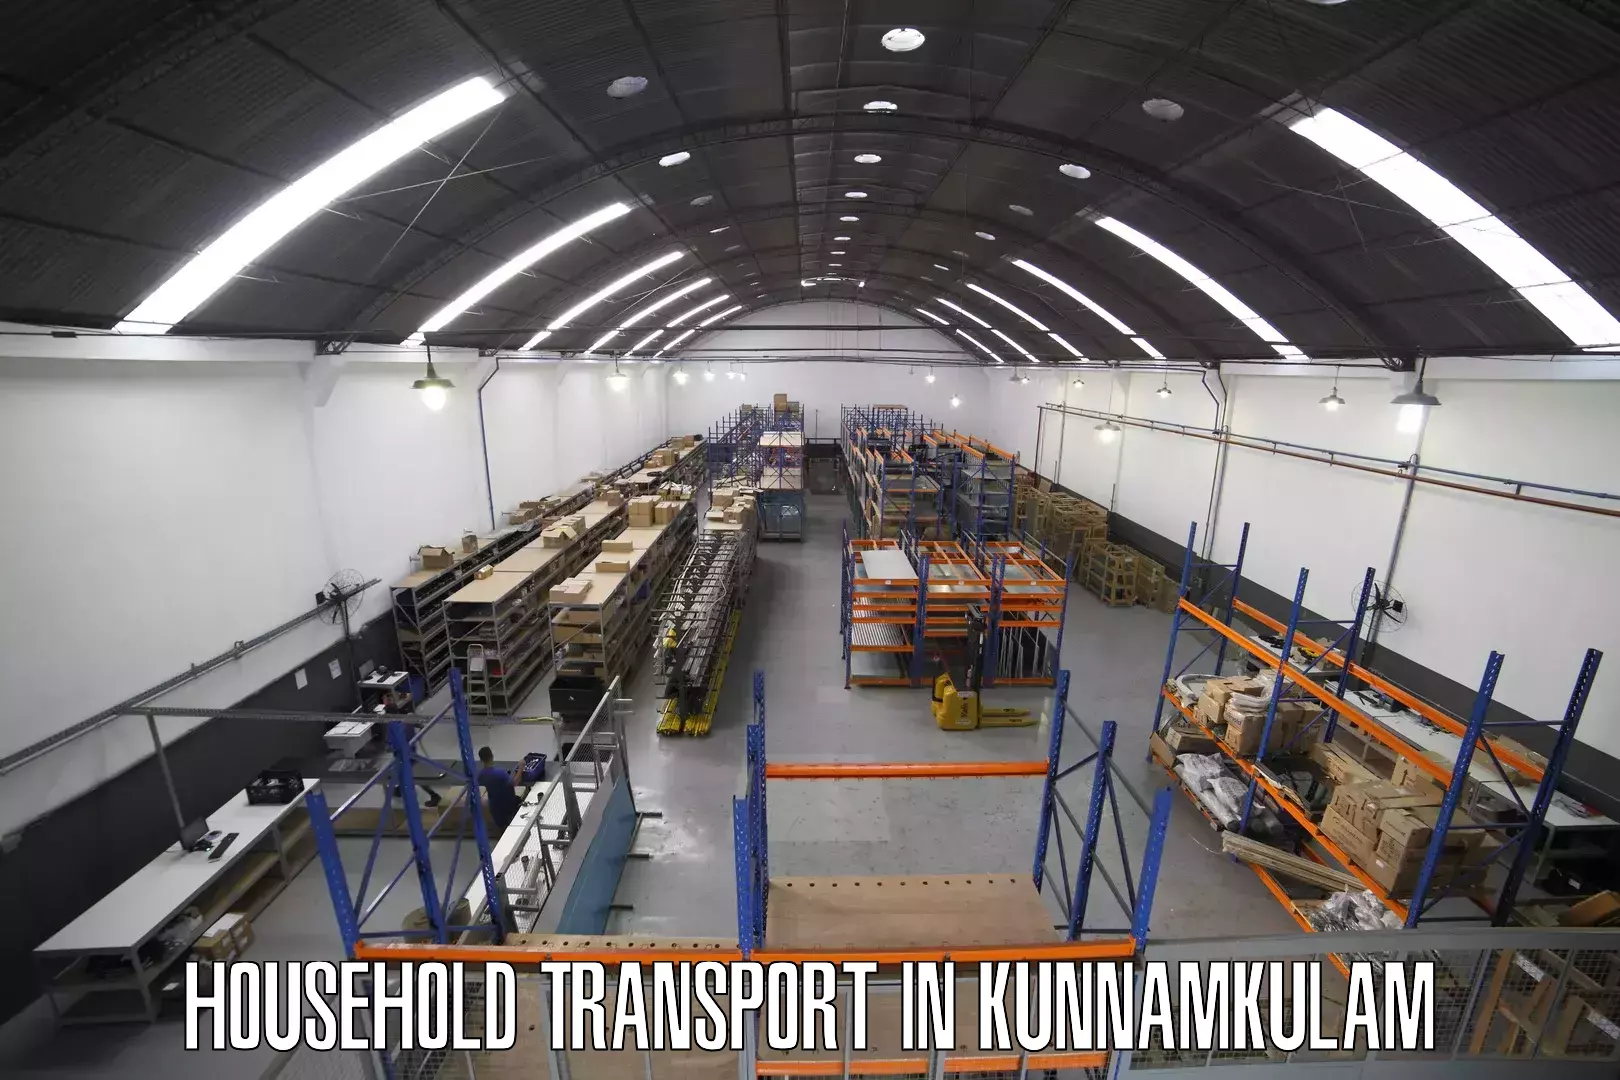 Household transport services in Kunnamkulam